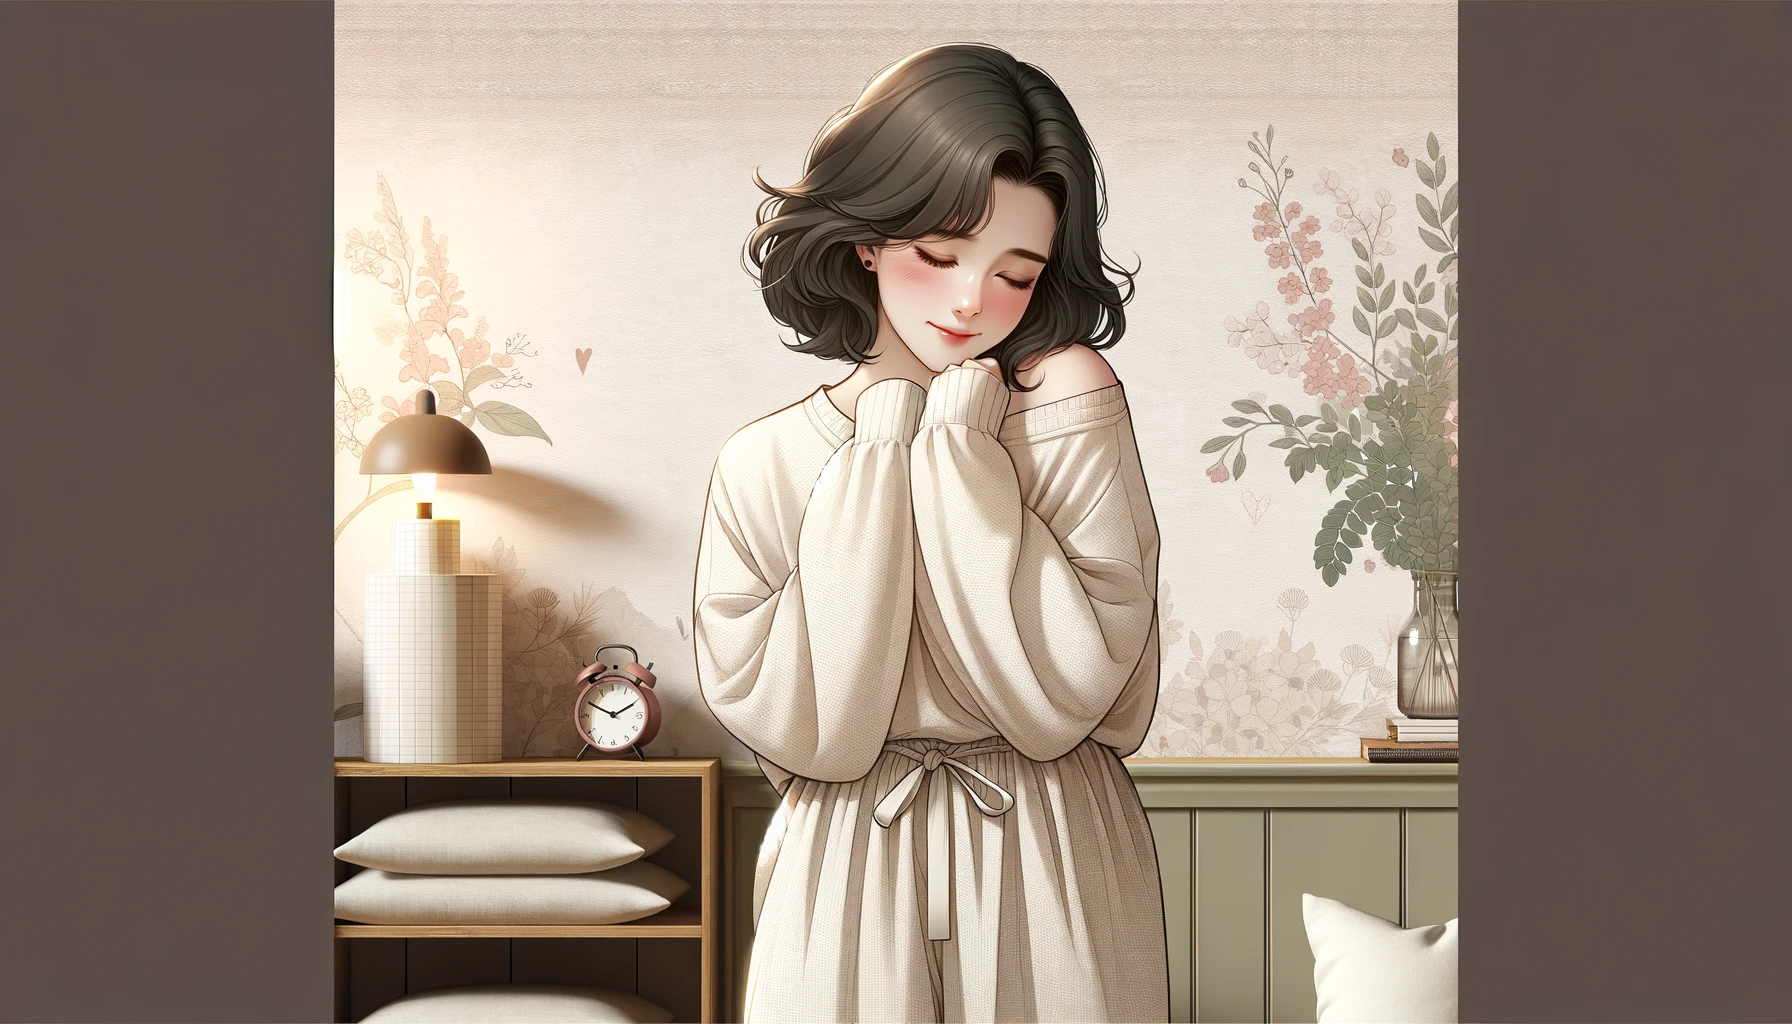 General 1792x1024 AI art living rooms women indoors indoors short hair digital art makeup closed mouth closed eyes clocks shelves standing smiling dark hair pillow wall floral one bare shoulder leaves earring long sleeves Asian women